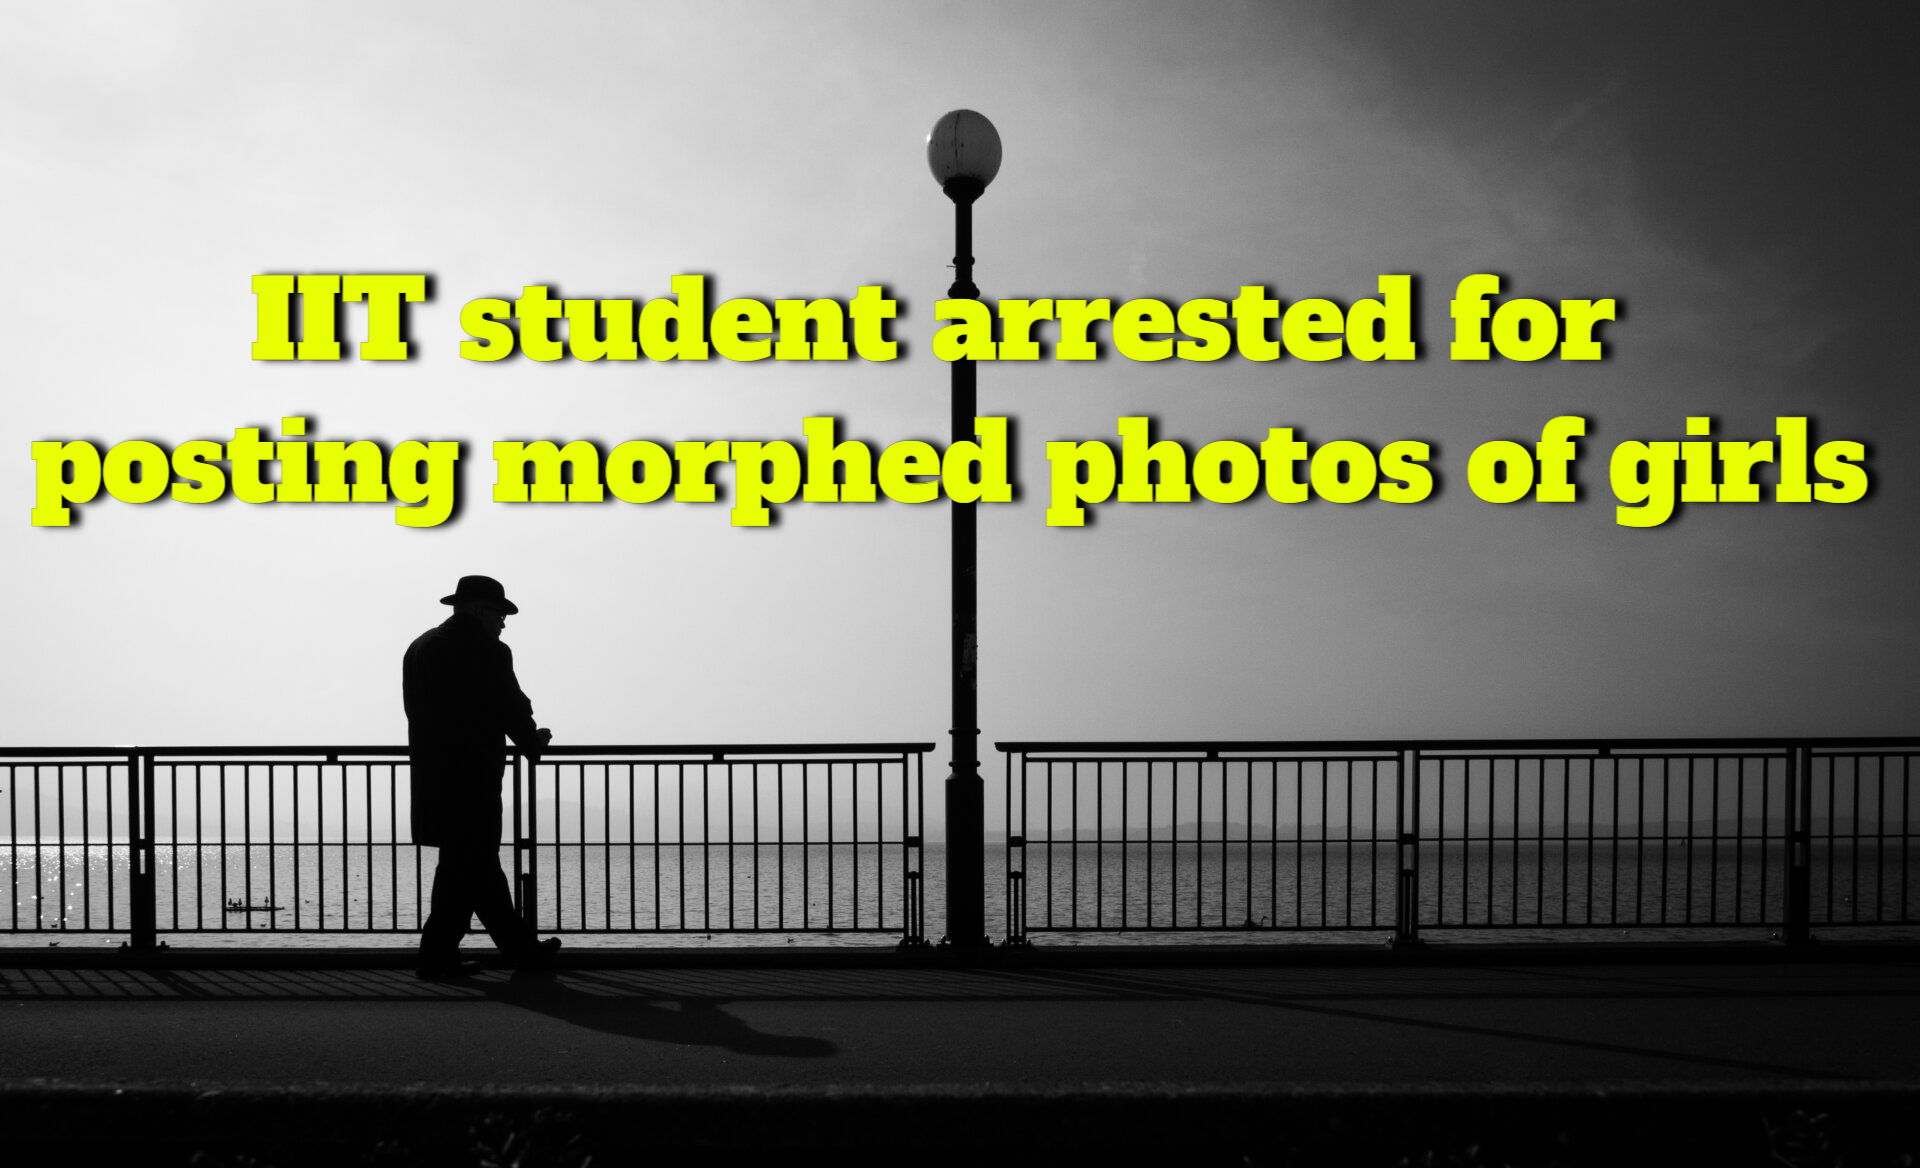 Posting morphed photos of young girls led to the arrest of IIT student